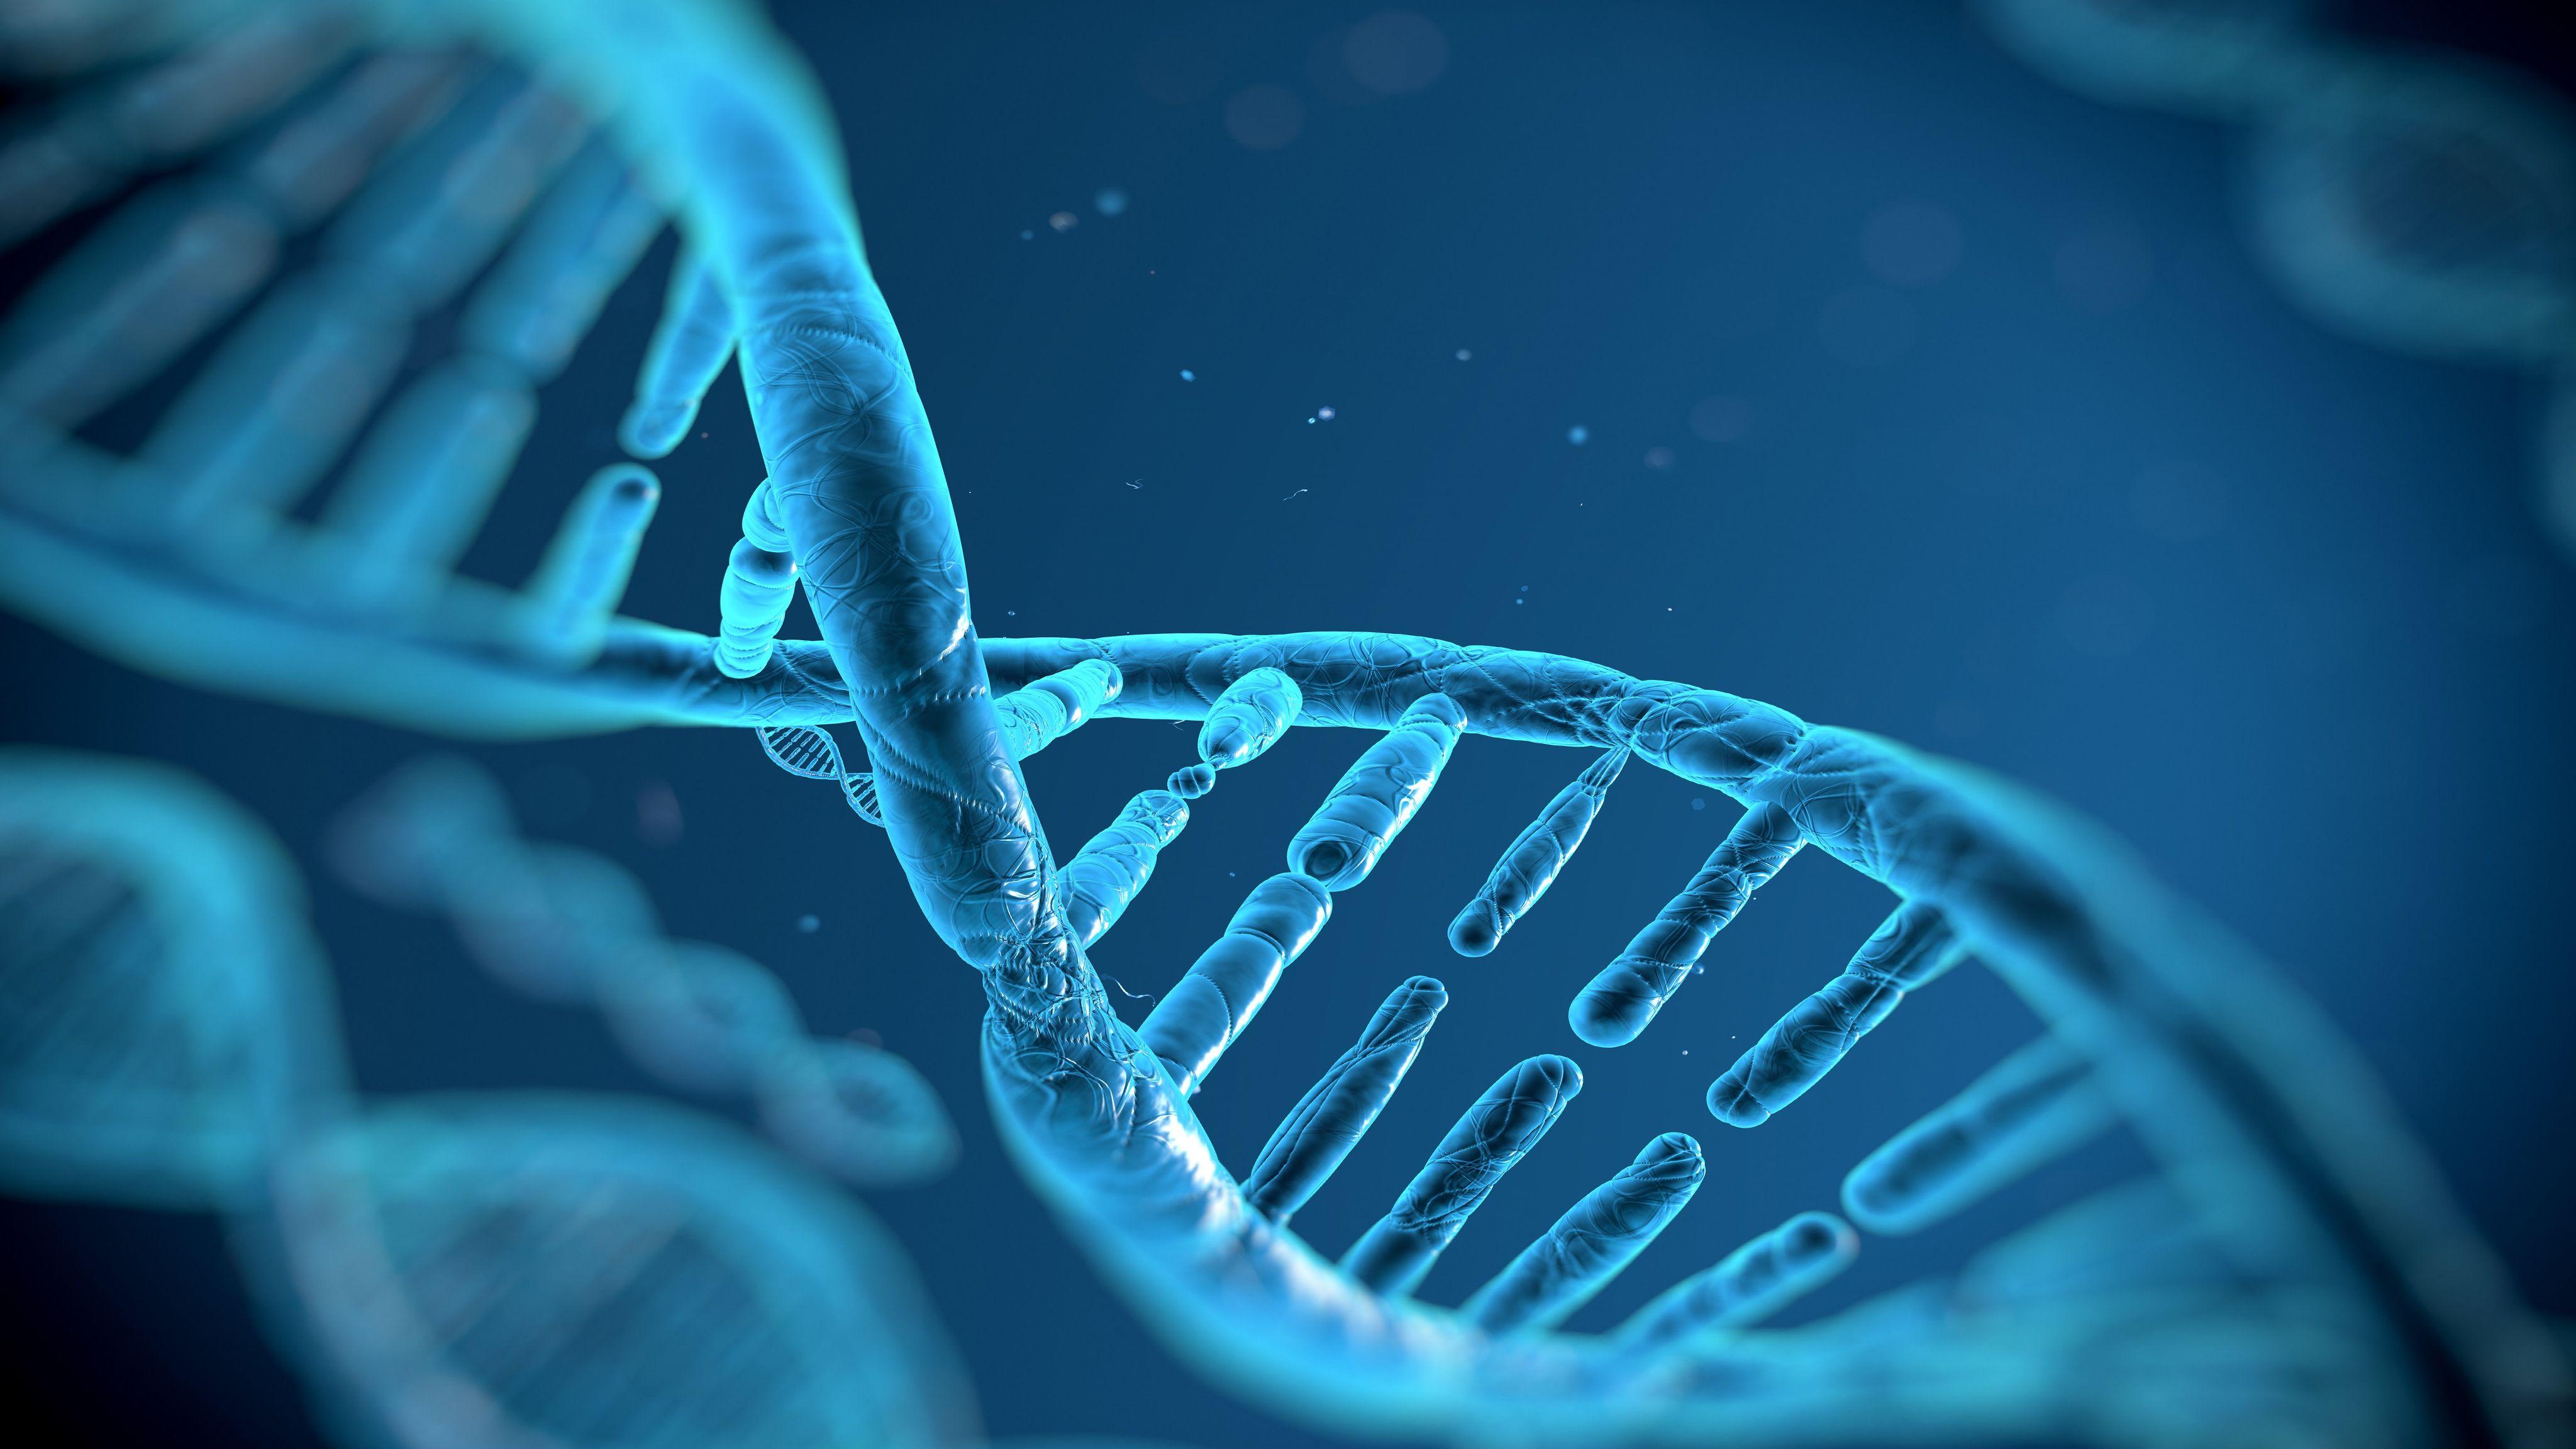 Dna 4k Wallpapers Top Free Dna 4k Backgrounds Wallpaperaccess